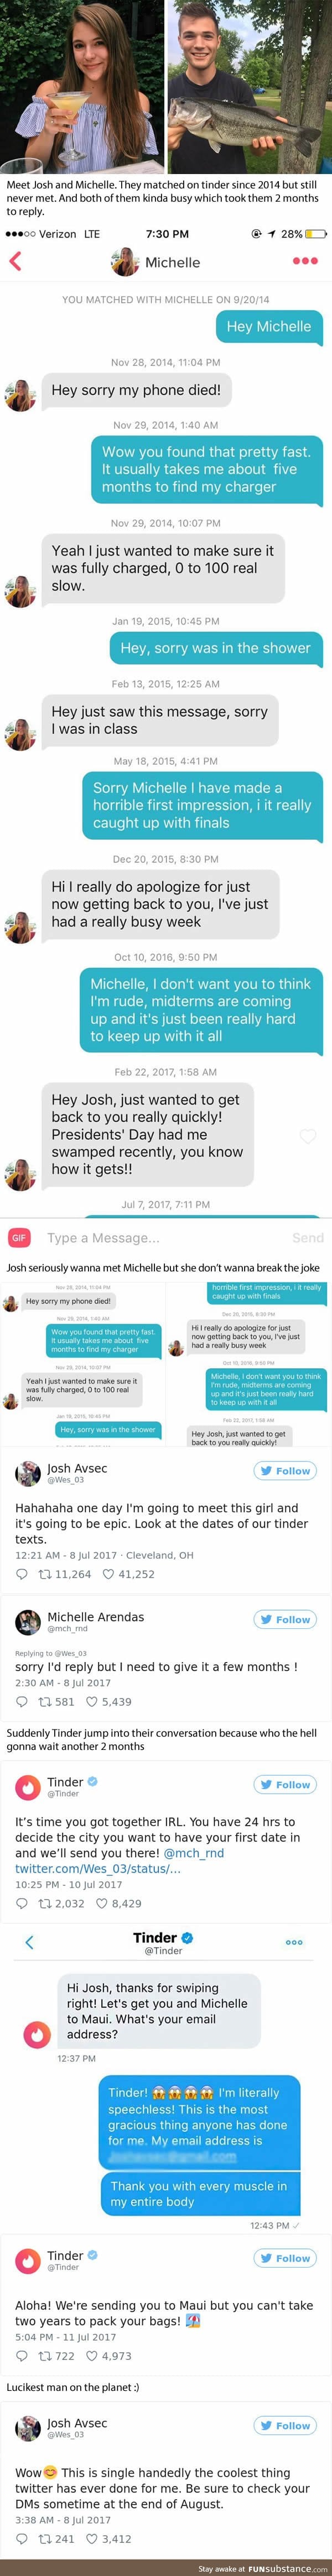 Two strangers have been carrying on a hysterical Tinder conversation for years